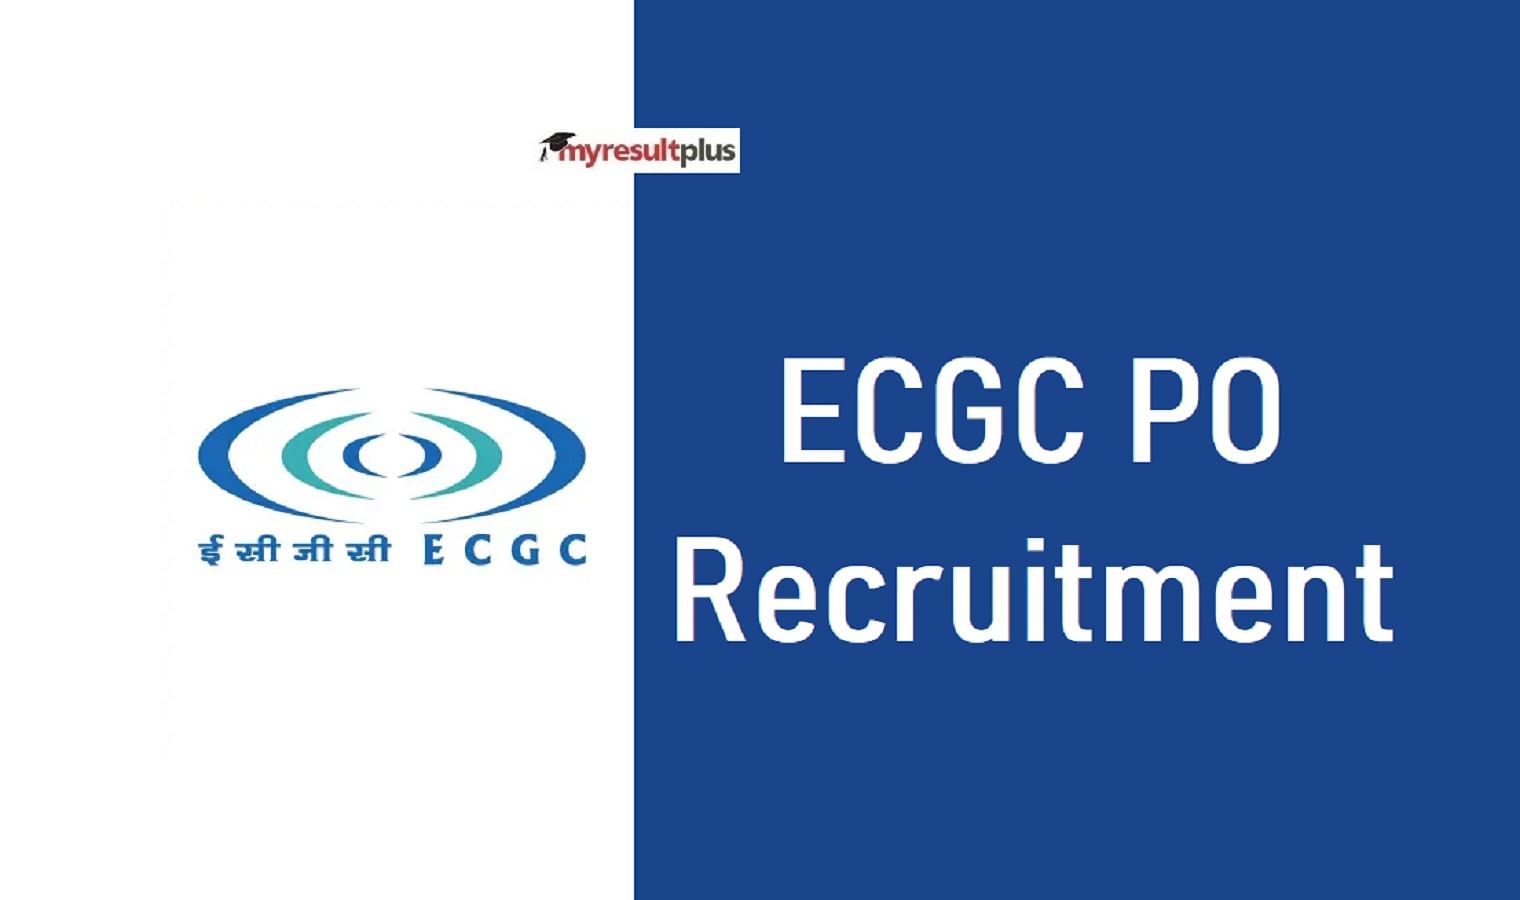 ECGC PO Recruitment 2022: Apply for 75 Probationary Officer Posts, Graduates can Apply